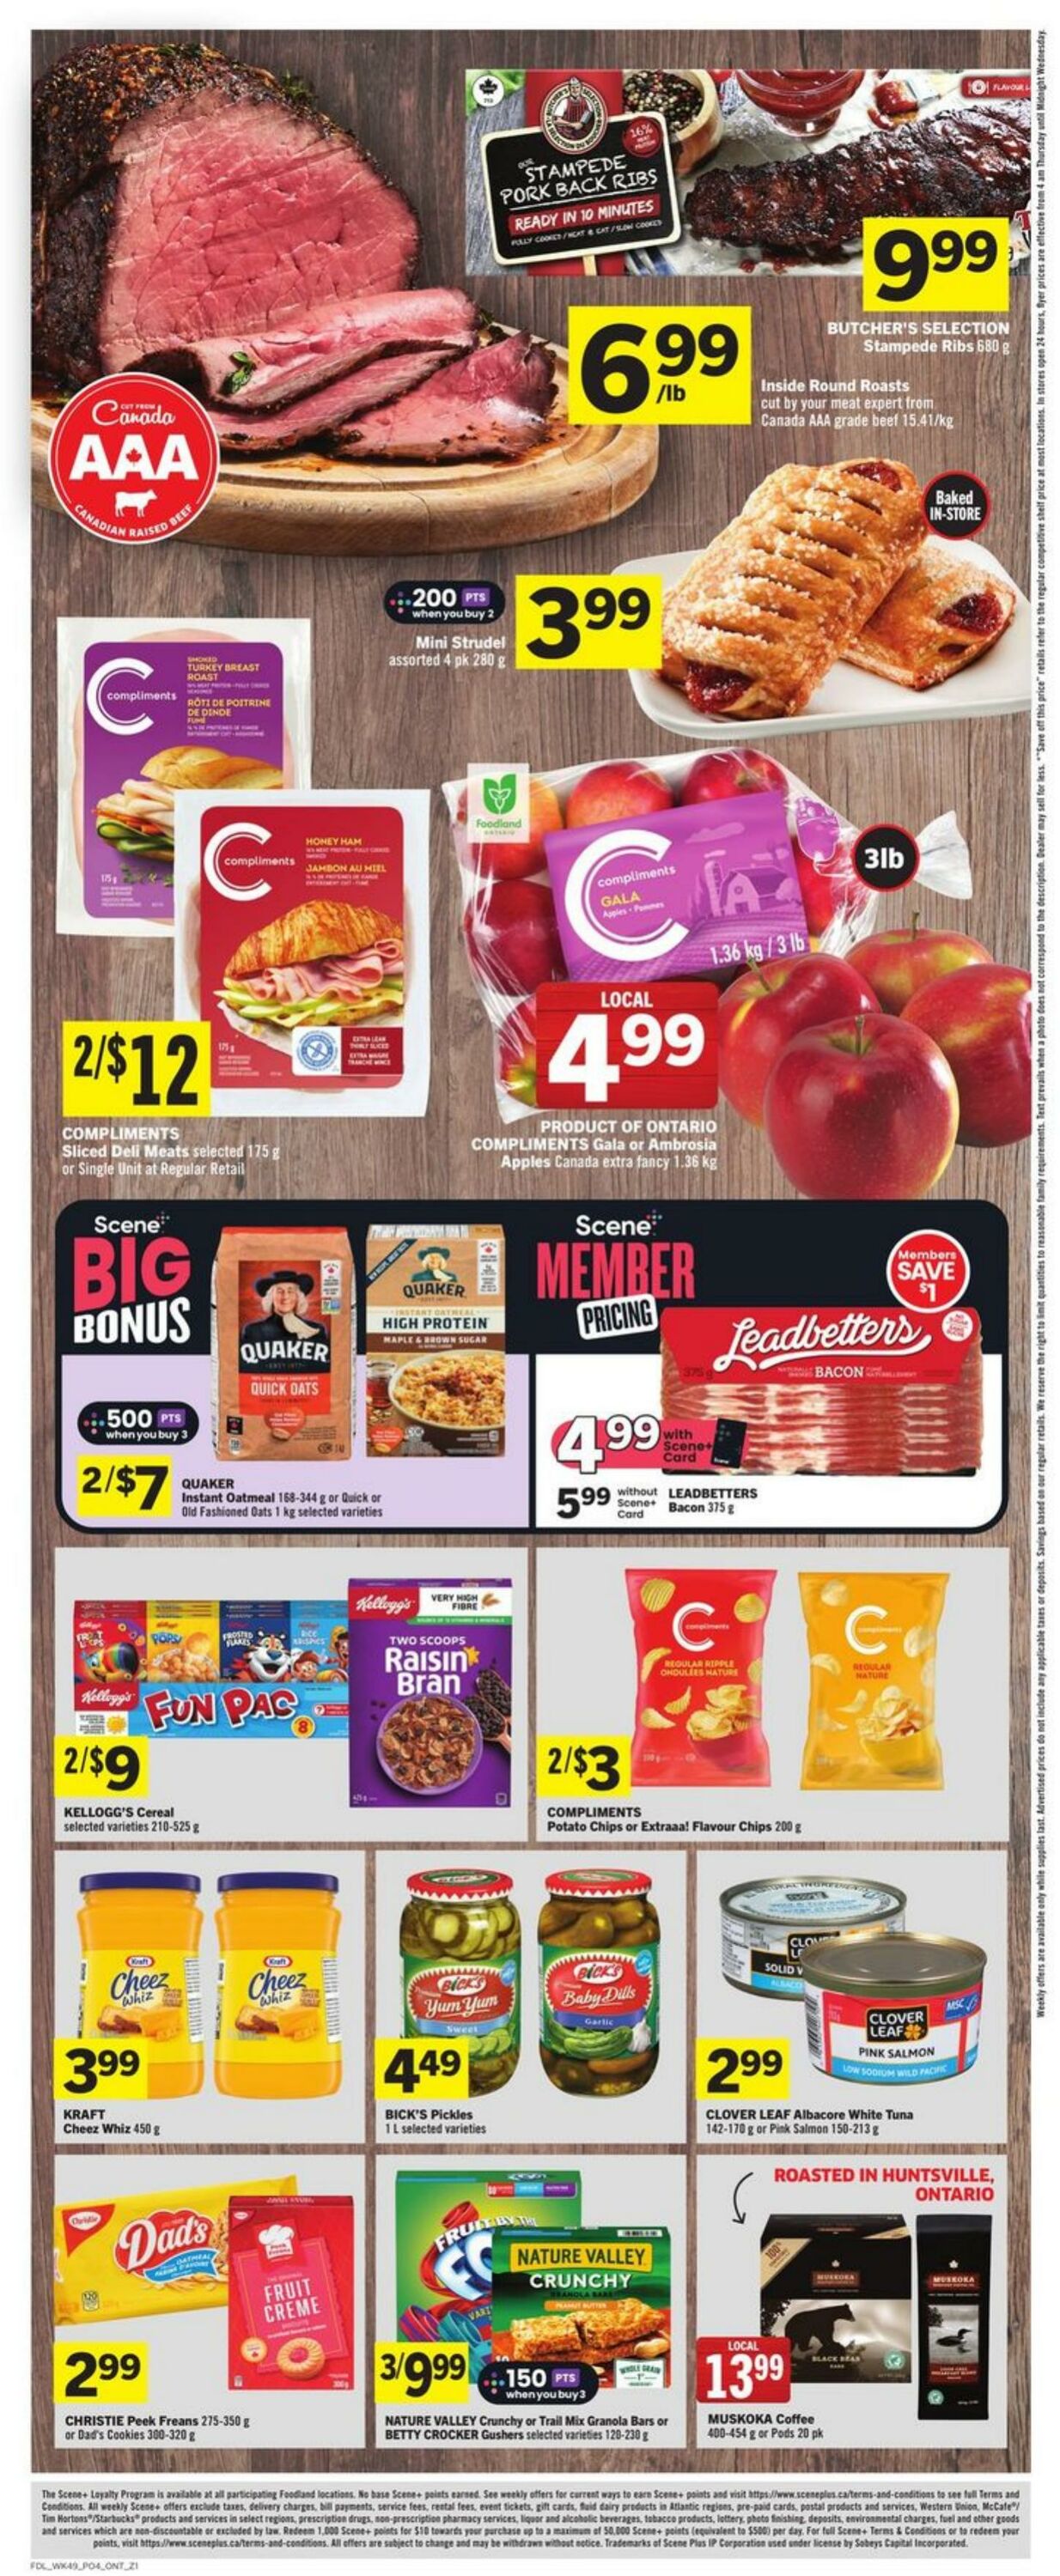 Foodland Flyer from 04/04/2024